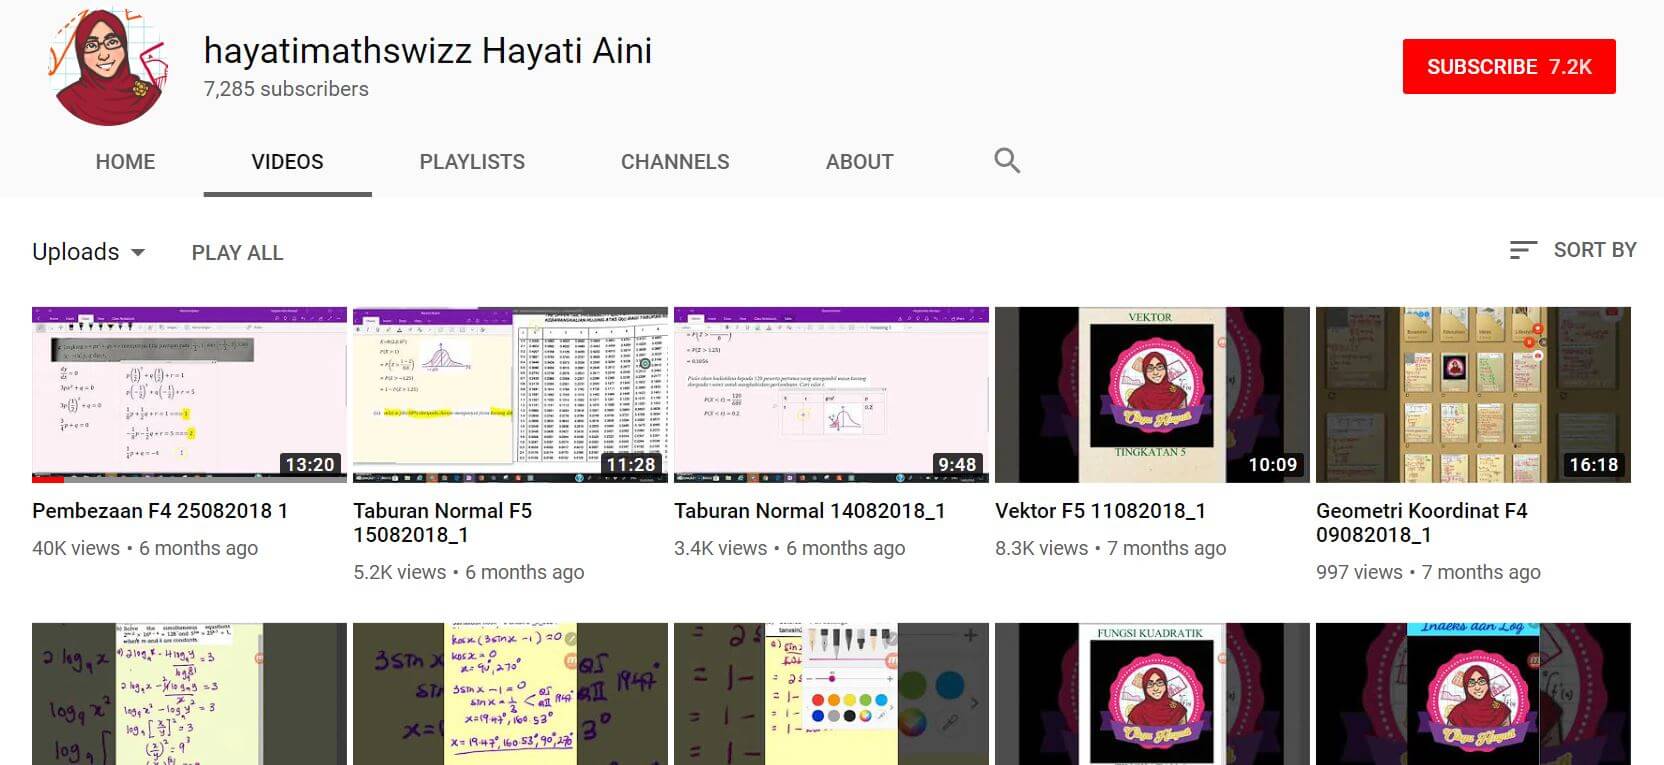 Late Add Maths Teacher Lives On Through the 300+ Tutorials She Uploaded to Youtube - WORLD OF BUZZ